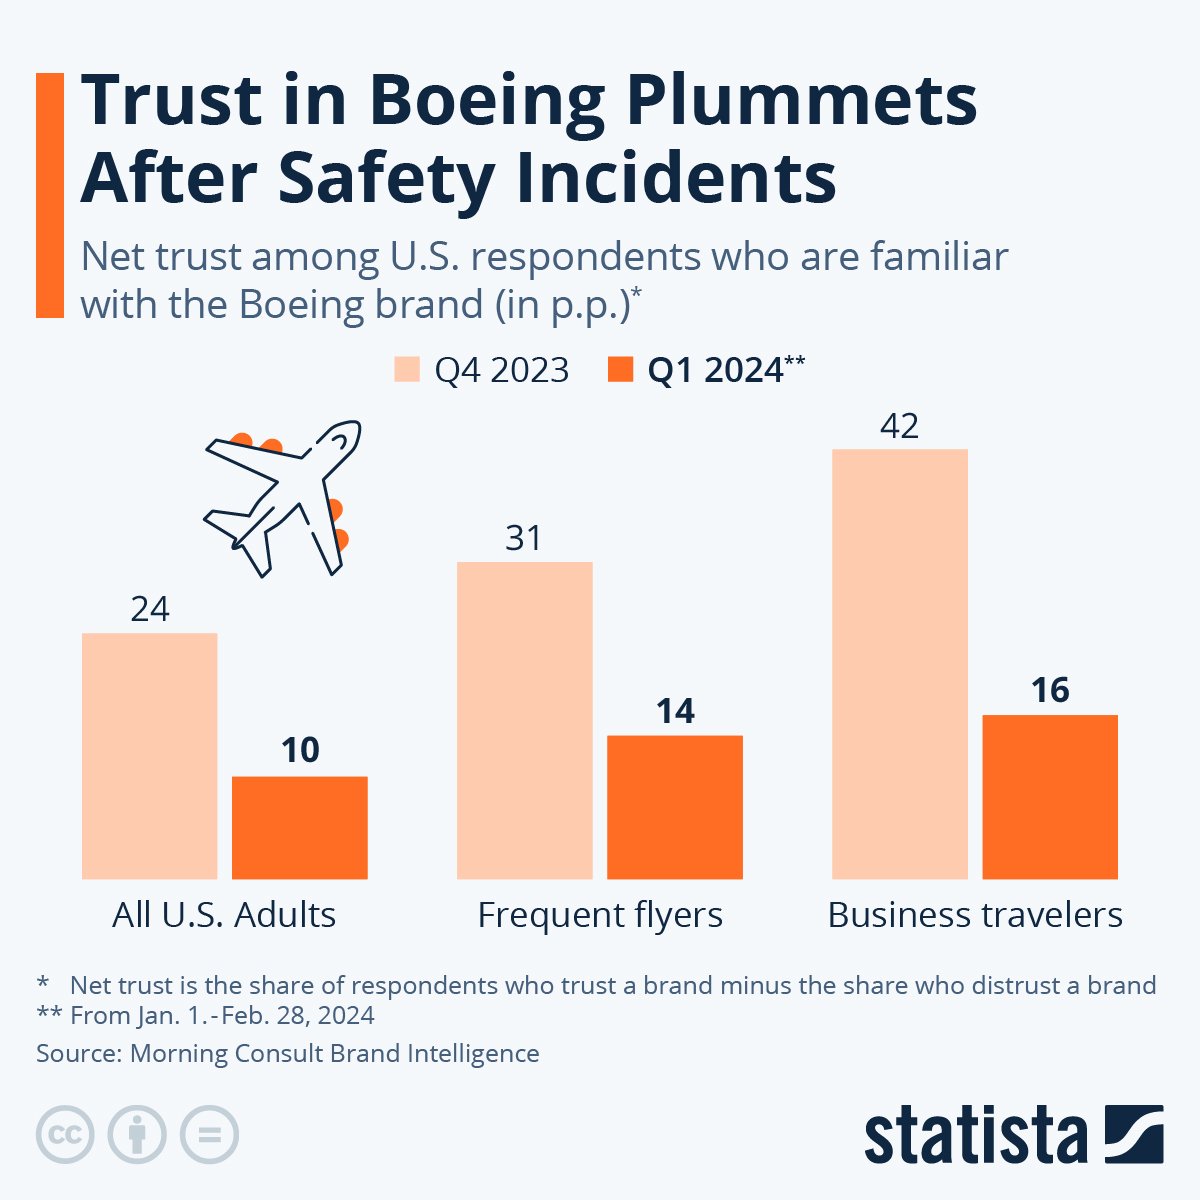 Image showing results to “Trust in Boeing Plummets After Safety Incidents” by Statista.